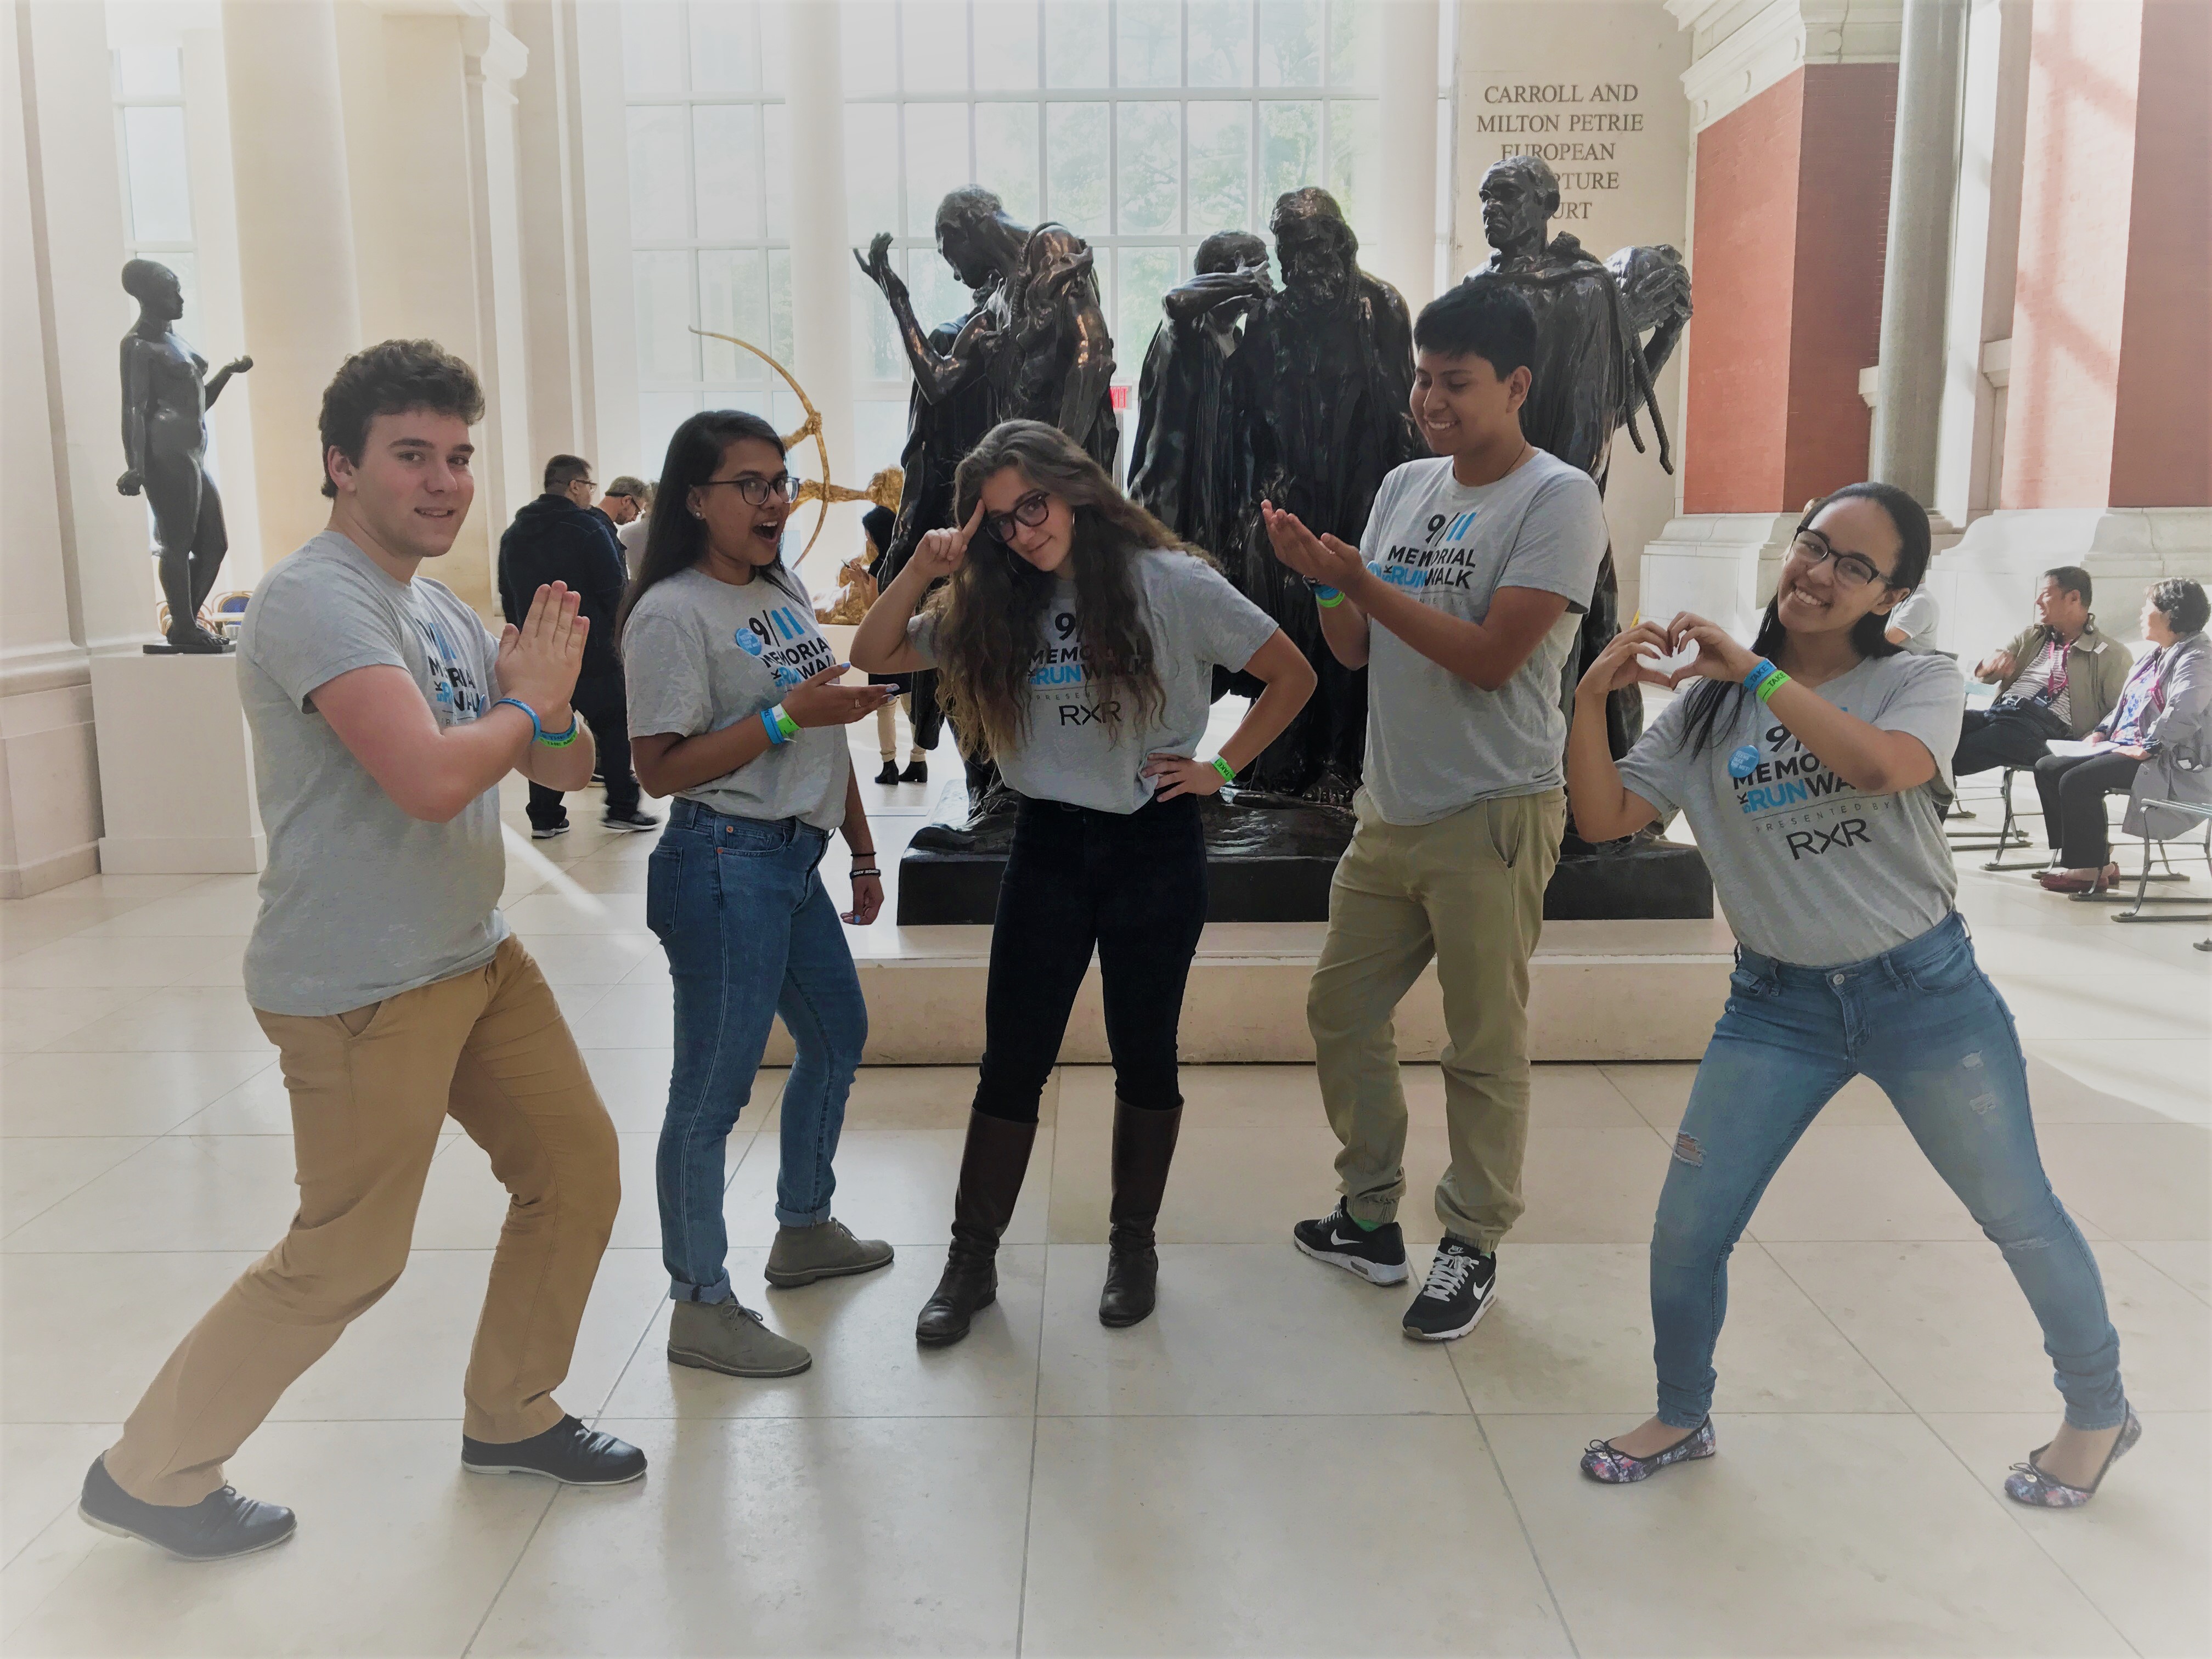 A group of 9/11 Museum ambassadors—two young men and three young women—strike a pose in the European sculpture gallery at the Metropolitan Museum of Art. Several sculptures stand behind them.